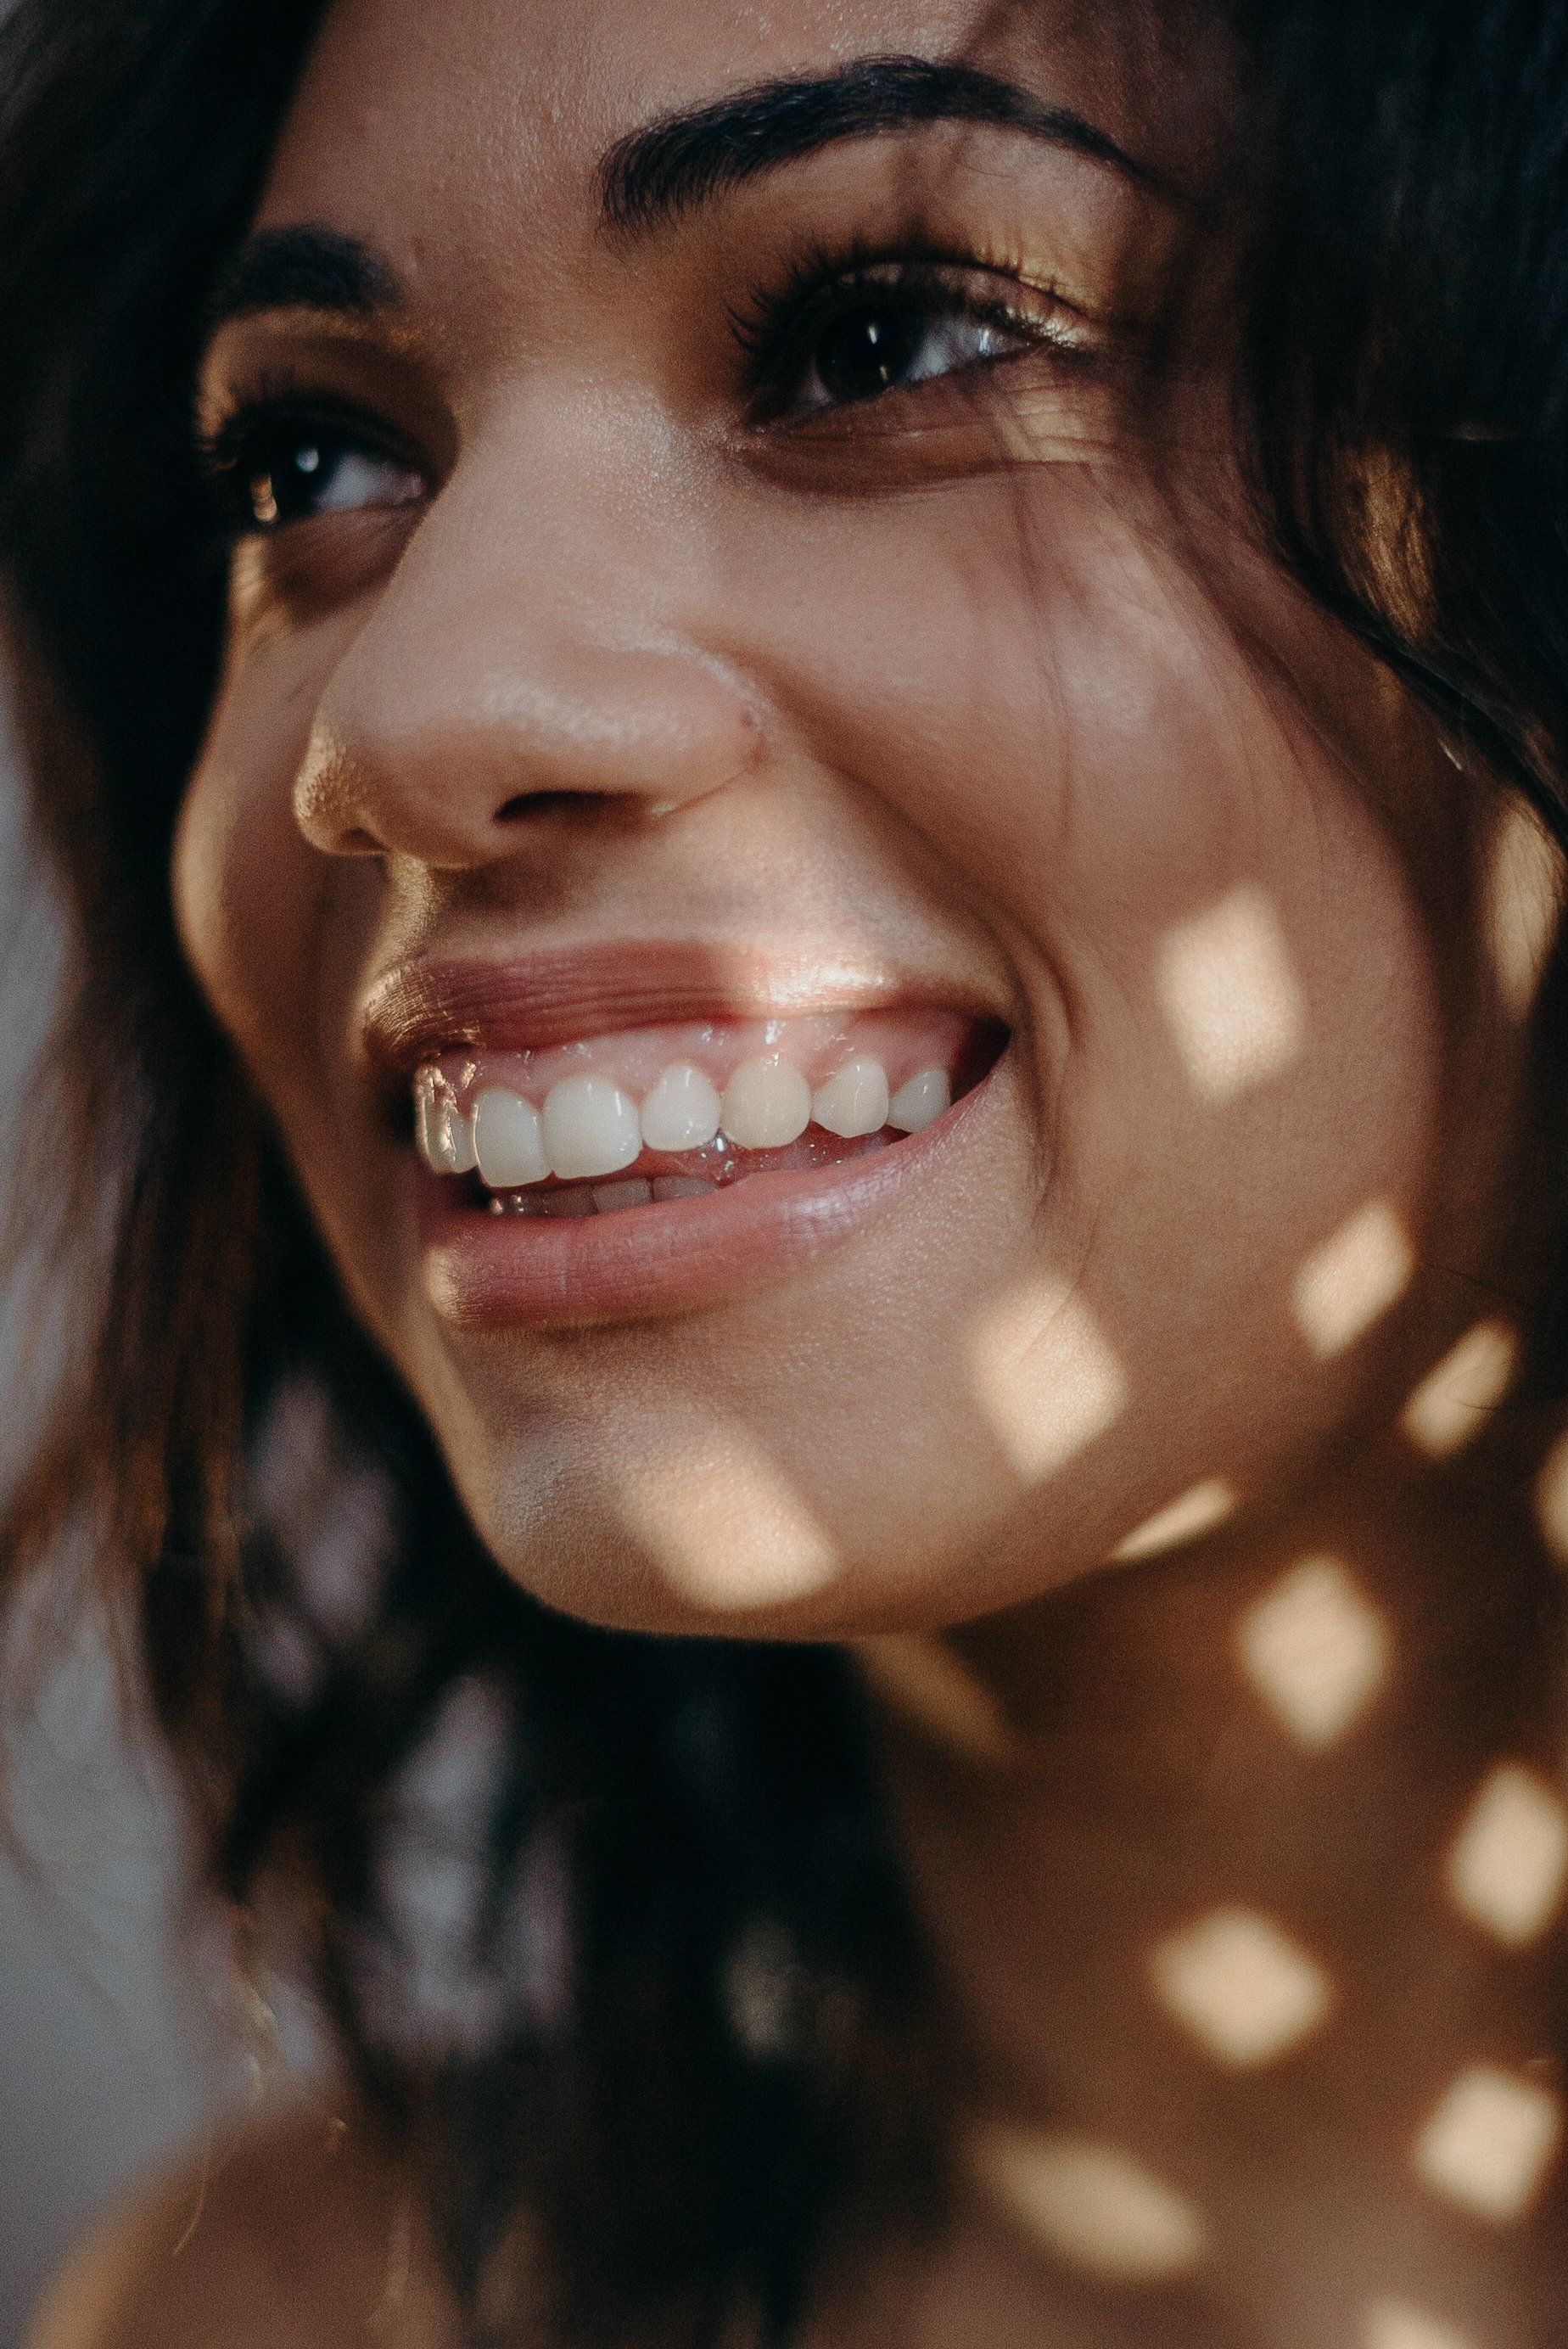 A close up of a woman 's teeth with a smile on her face.